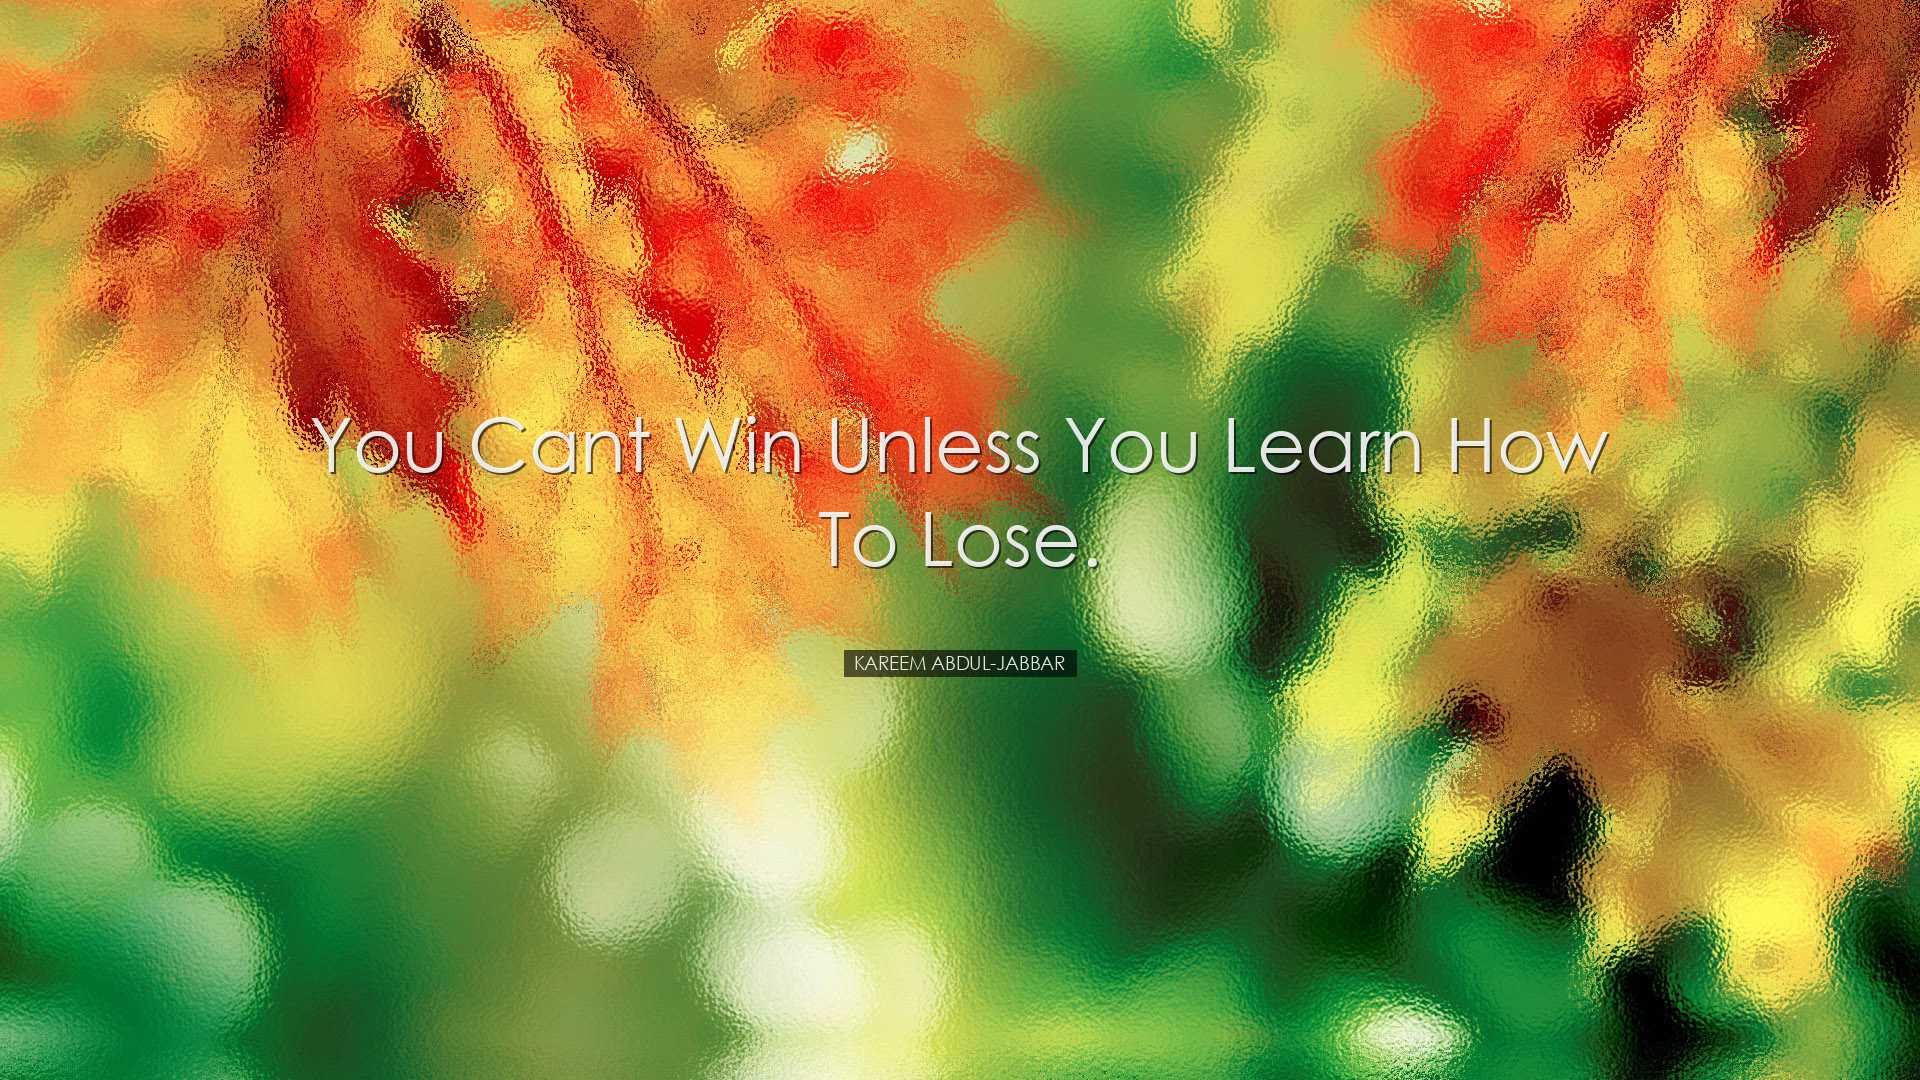 You cant win unless you learn how to lose. - Kareem Abdul-Jabbar